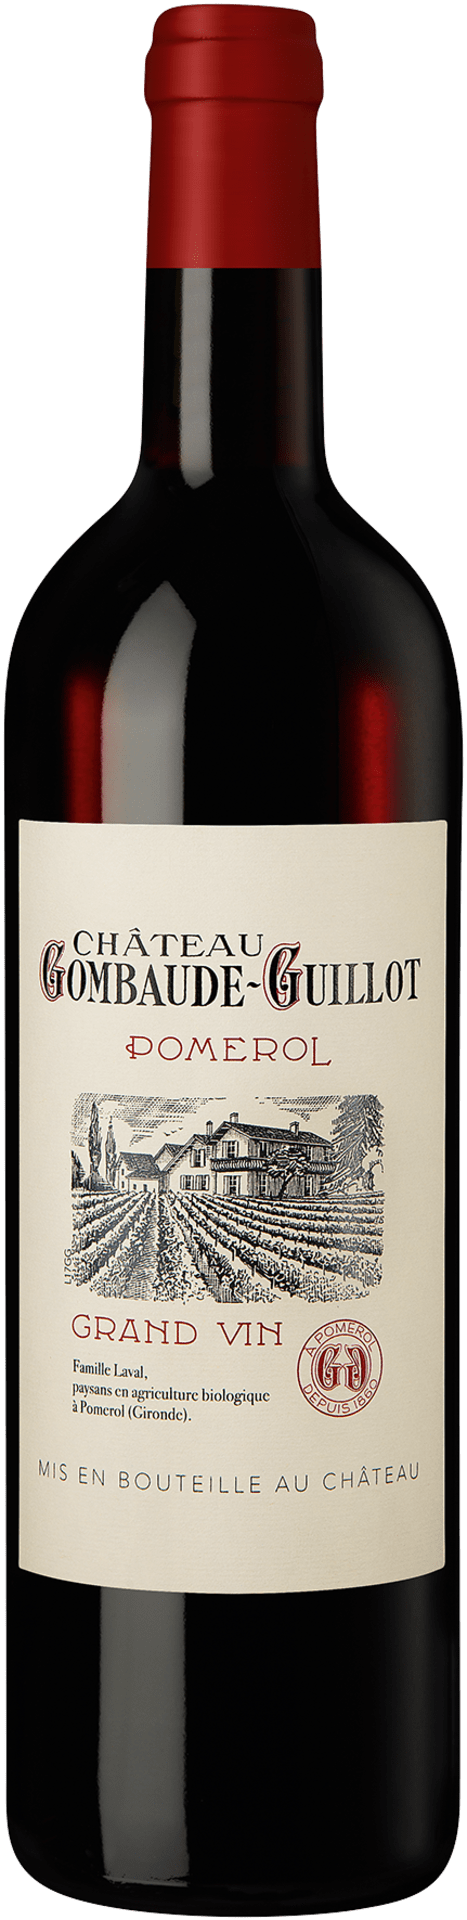 Chateau Gombaude Guillot